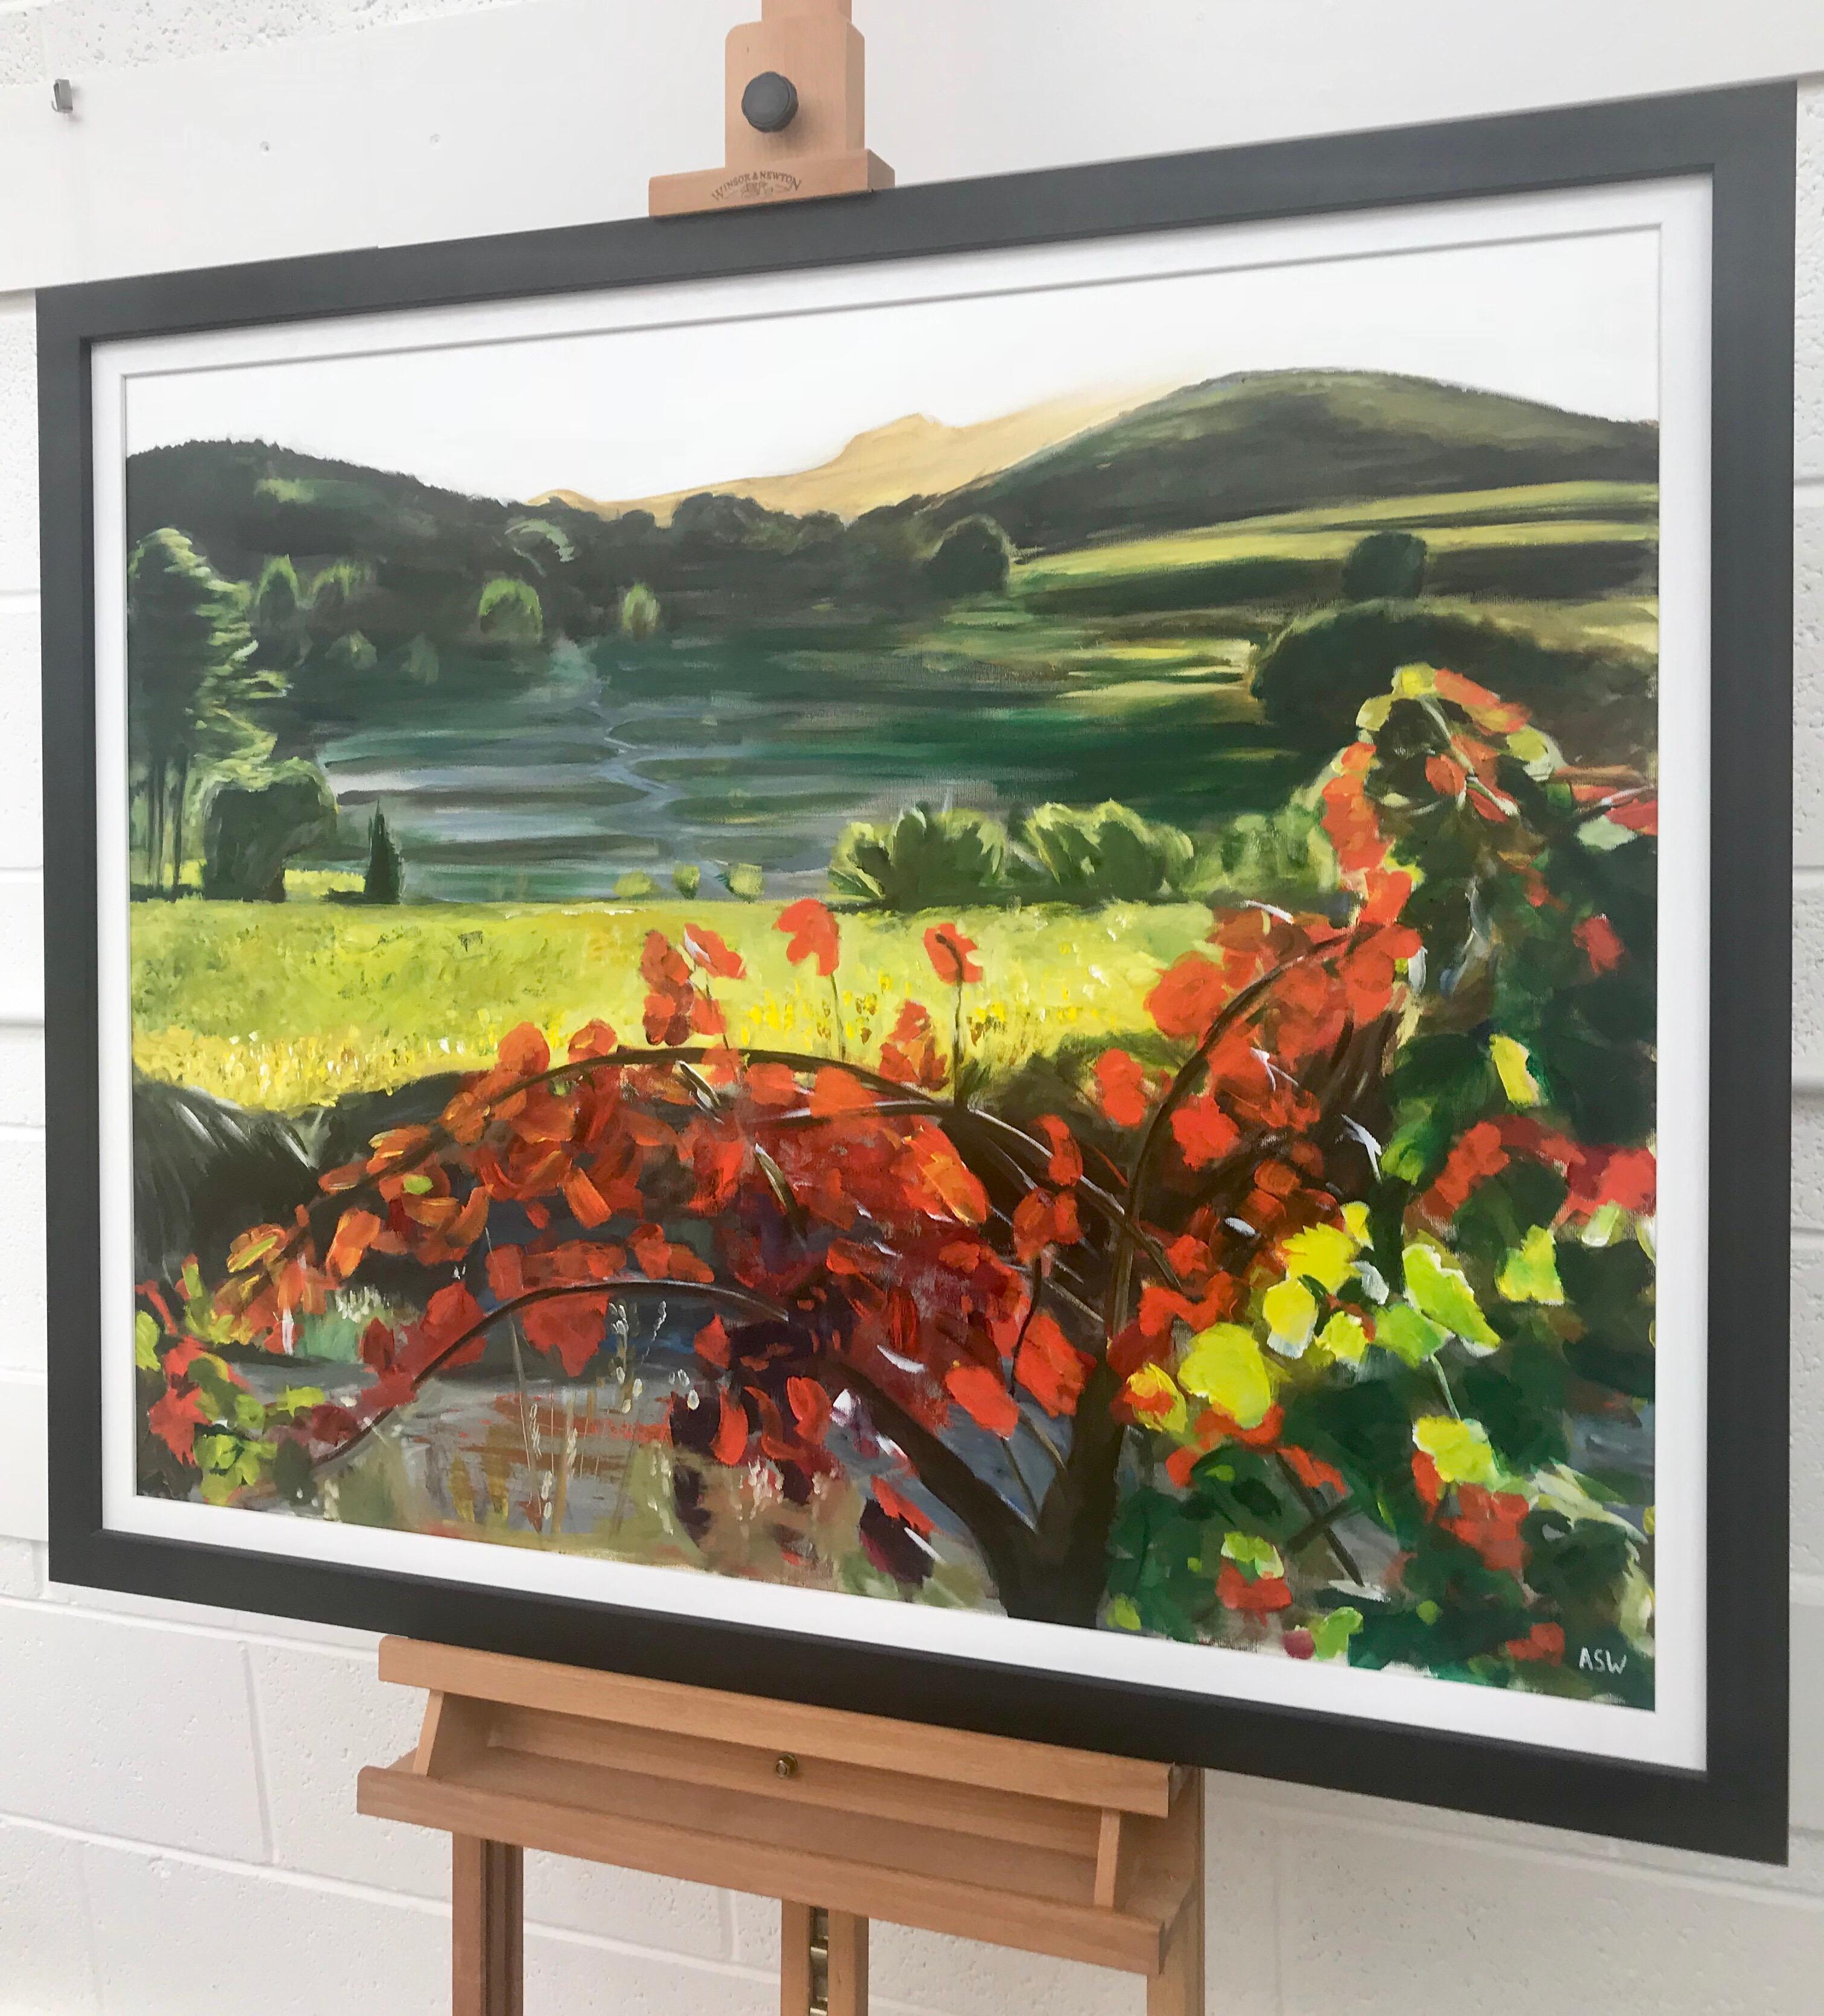 Original Painting of Hot Sunny Penedès Vineyard in Spain Countryside, a rare rural landscape painting by leading English Landscape artist, Angela Wakefield. During 2012, Angela embarked upon her European Series, which initially focuses on the unique